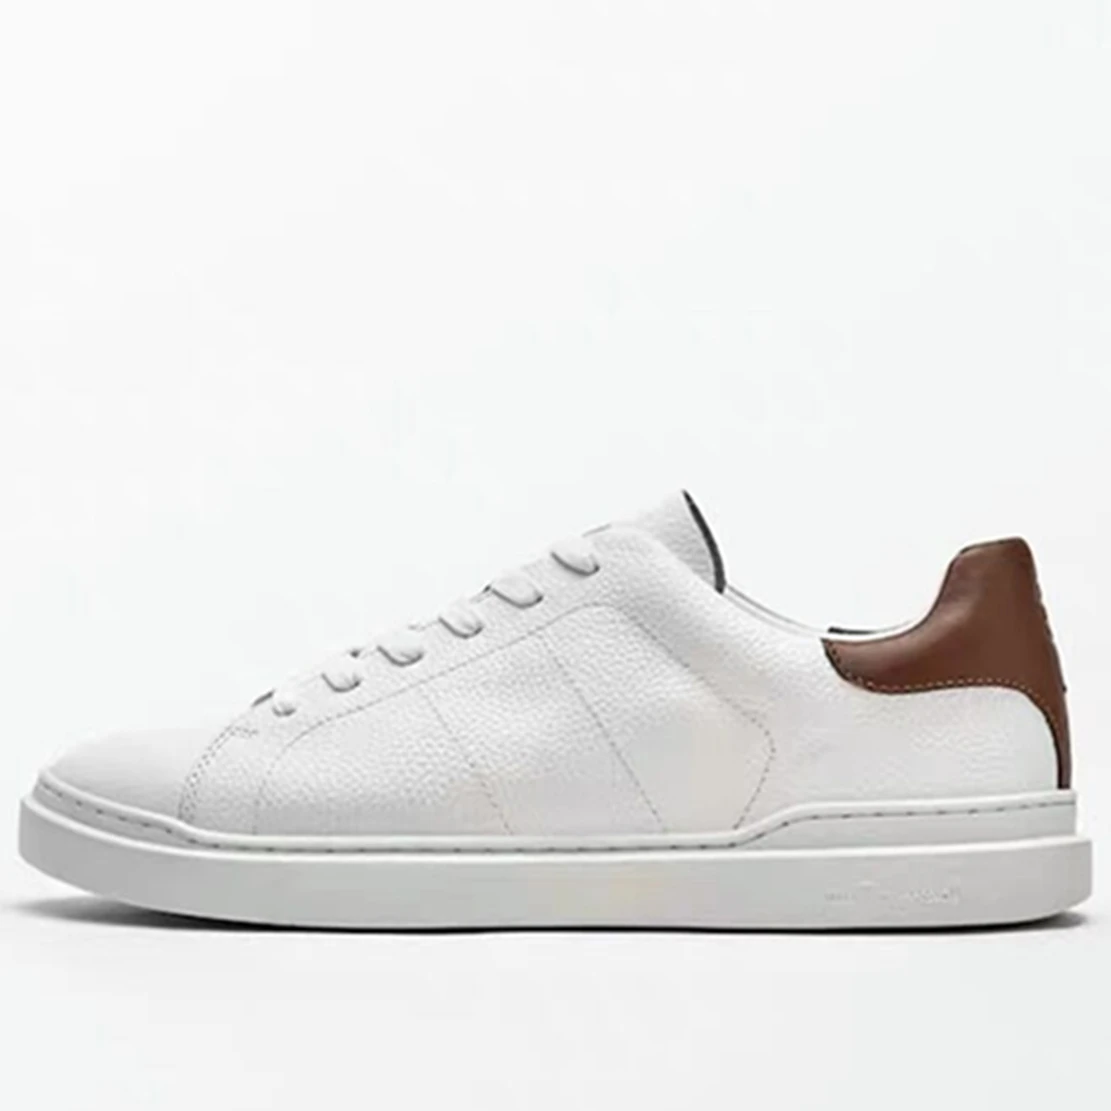 Jenny&Dave Fashion Simple Pure White  Shoes Man Genuine Leather Casual Shoes Man Cowhide Sneakers